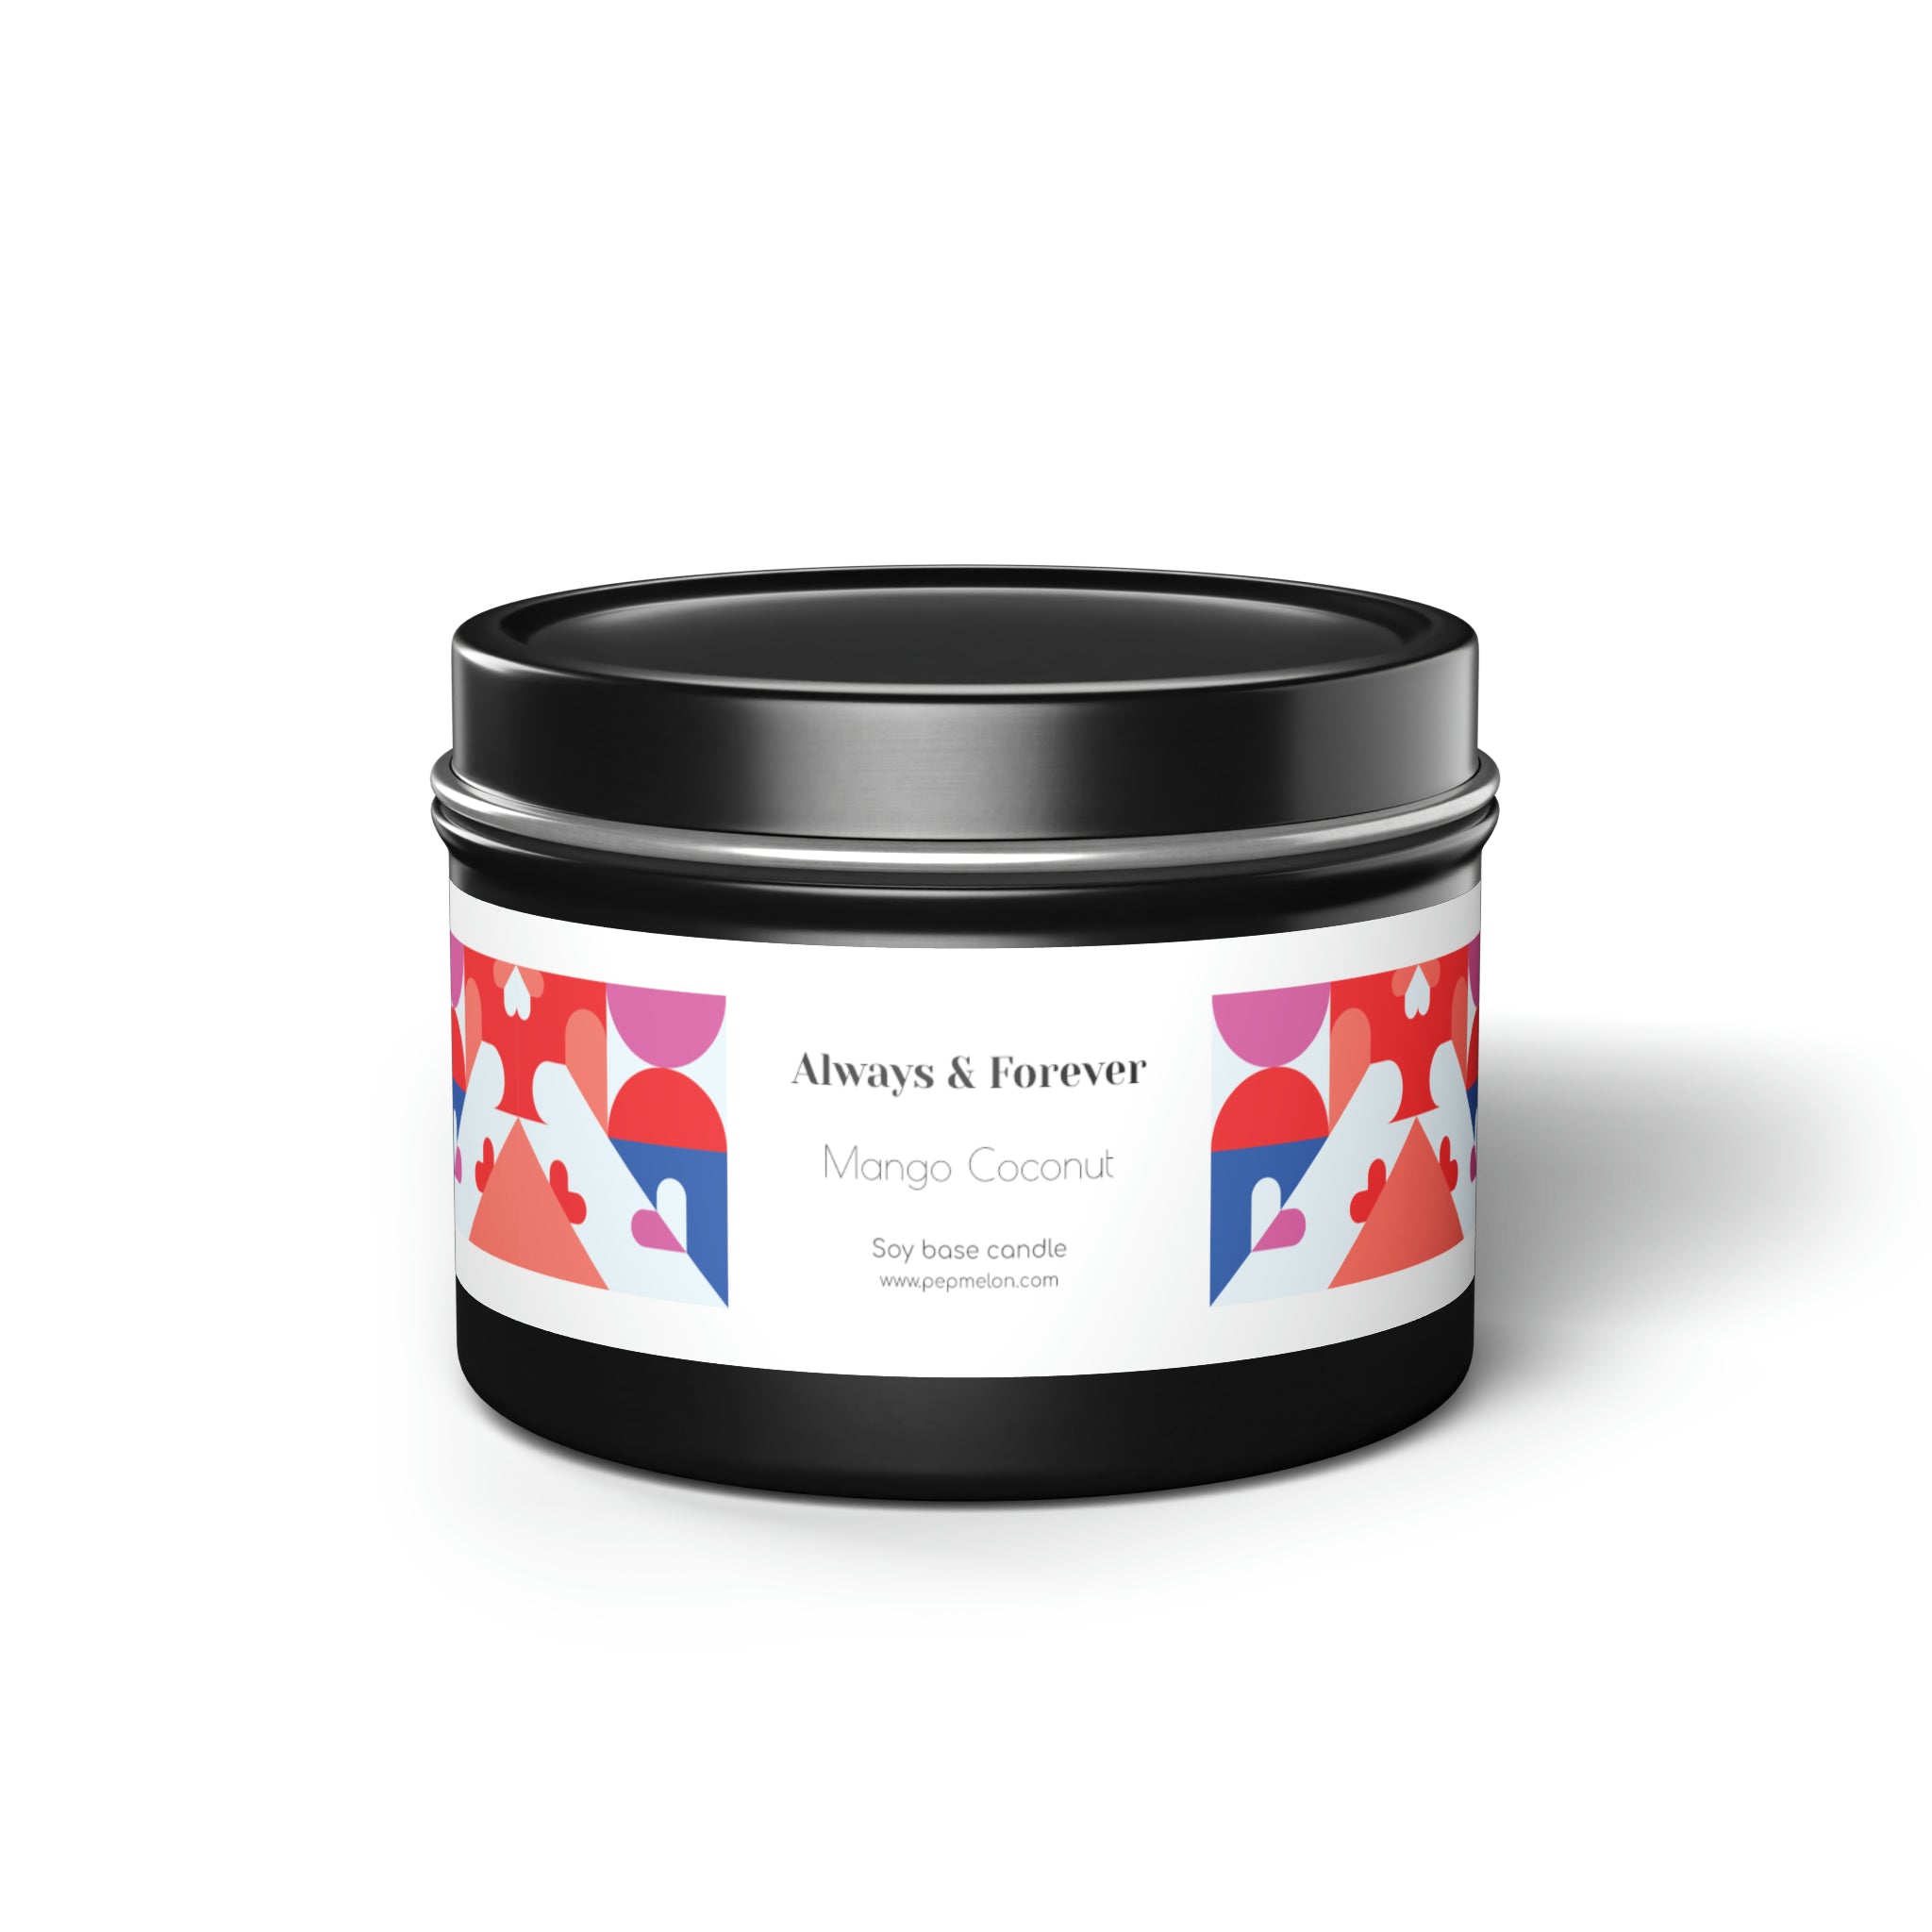 Mango coconut Always & Forever Soy base candle love, valentine's day gift Tin Candles-18